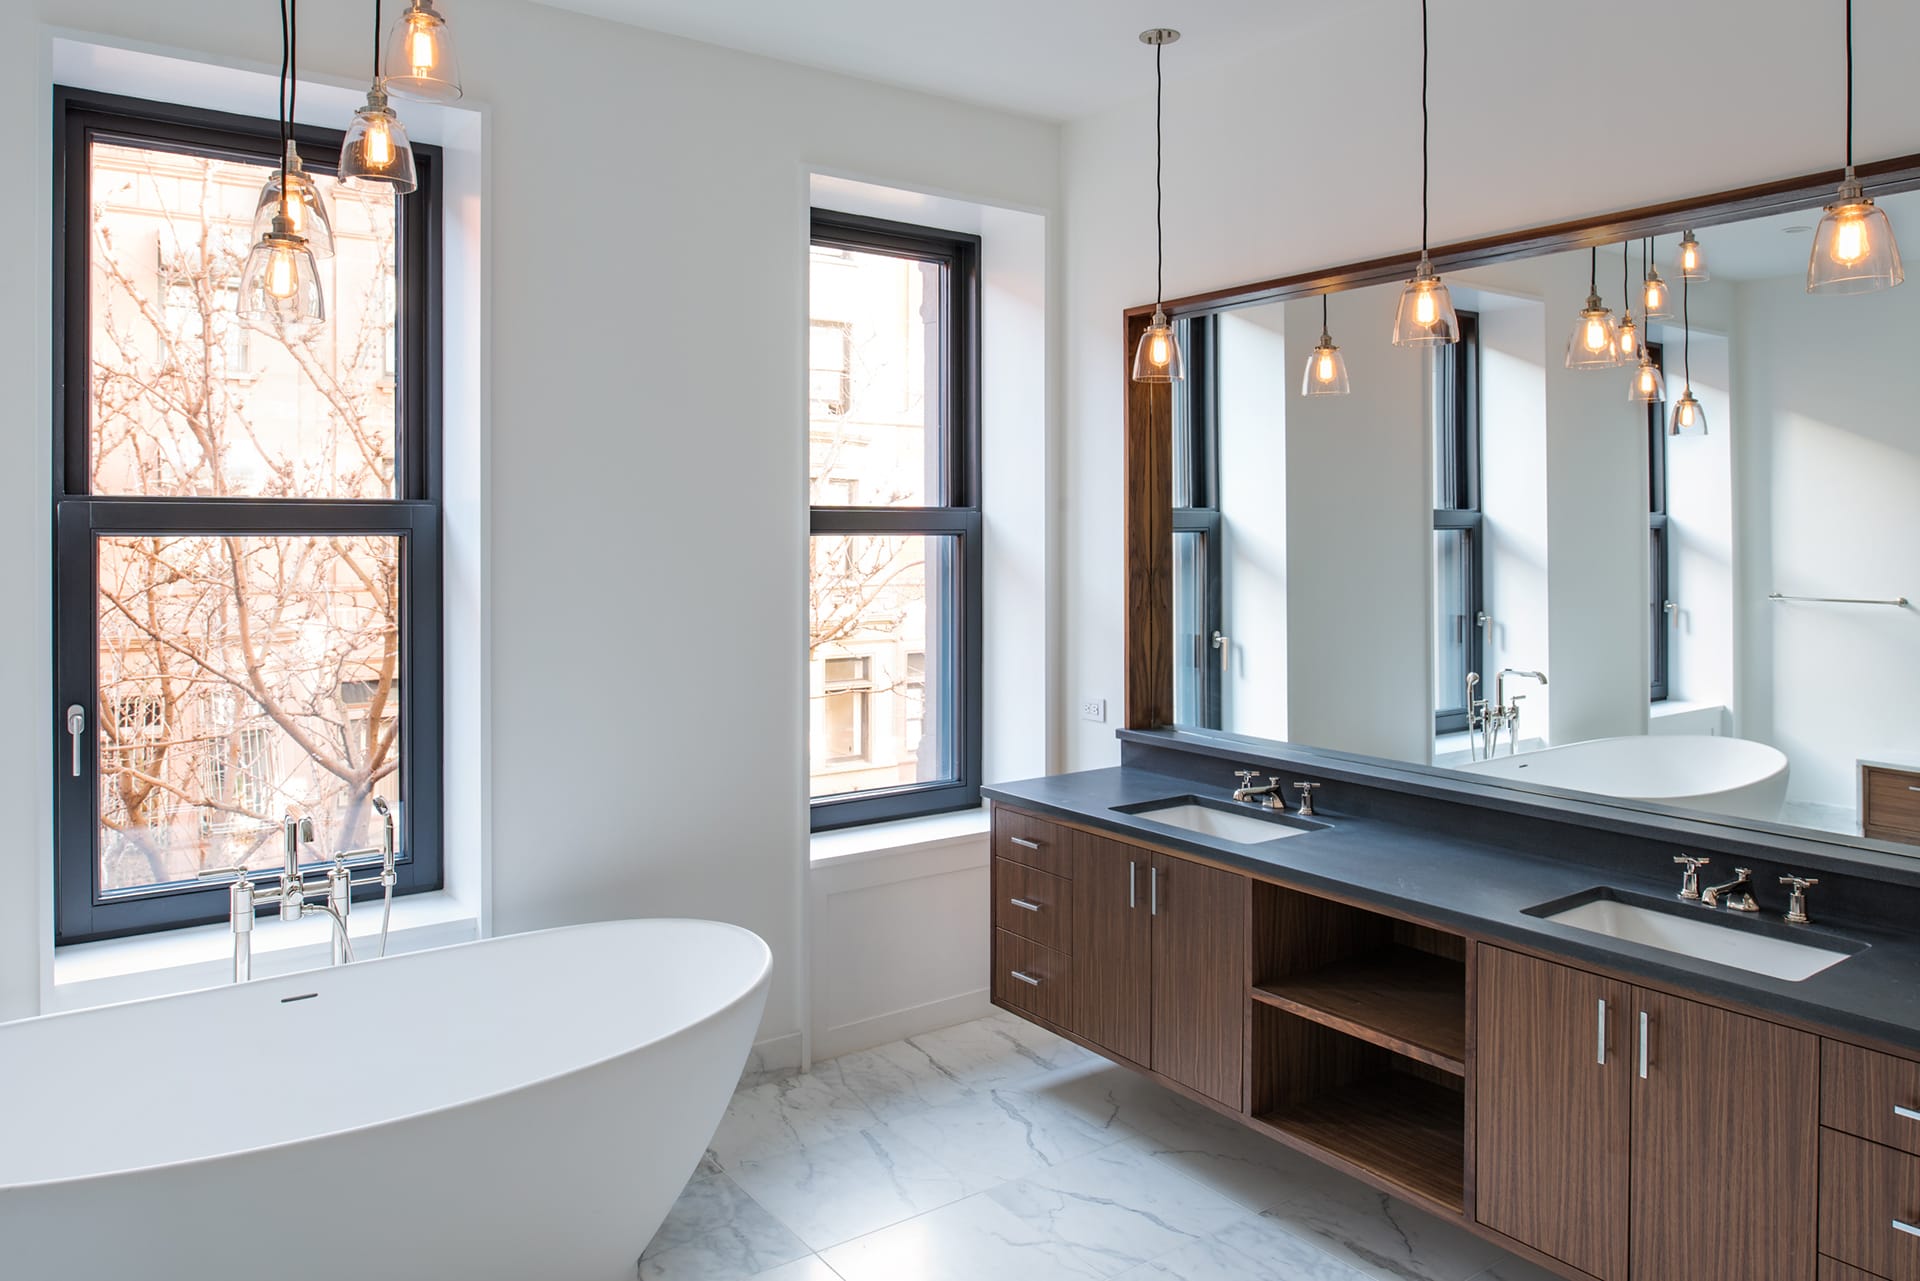 Freestanding tub, solid wood Jack and Jill vanity, and pendant lights in the primary bathroom of an Upper West Side Passive House.